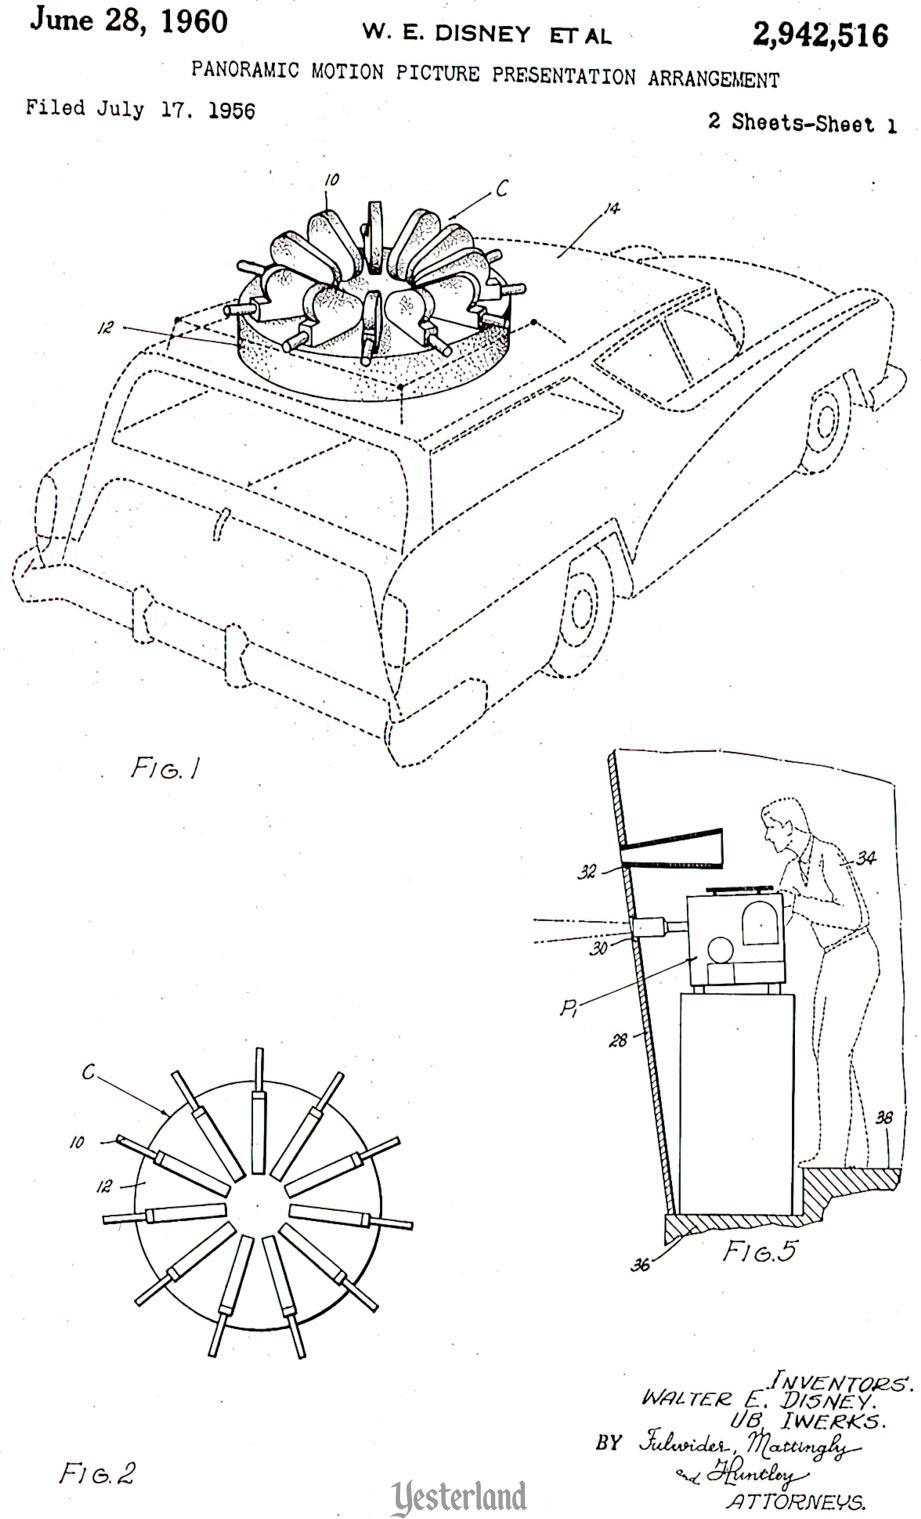 U.S. Patent number 2942516 drawing, sheet 1 of 2